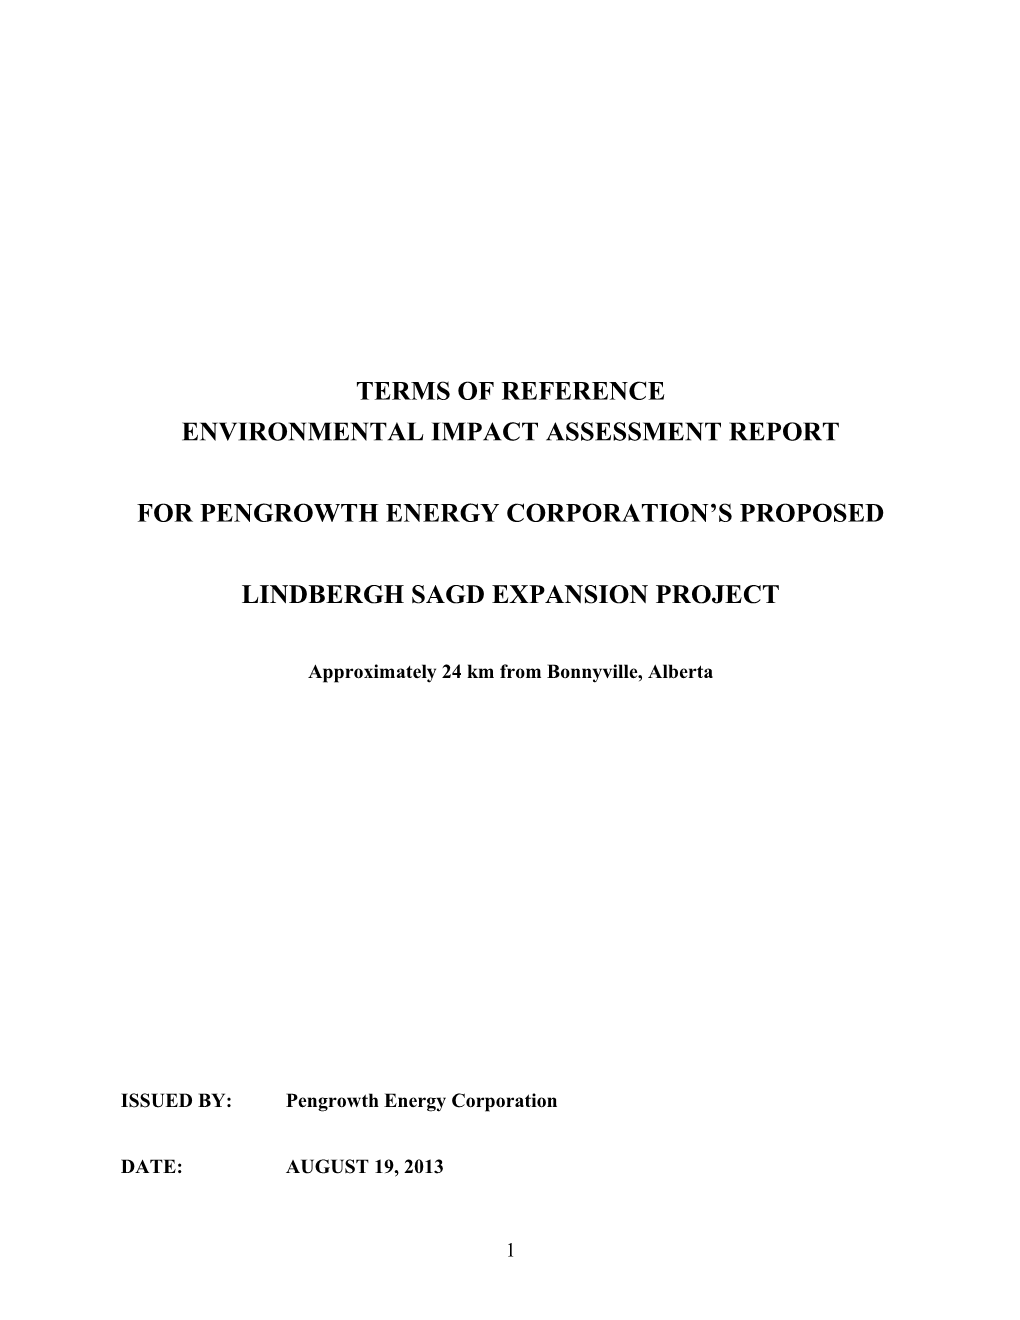 Terms of Reference Environmental Impact Assessment Report for Pengrowth Energy Corporation's